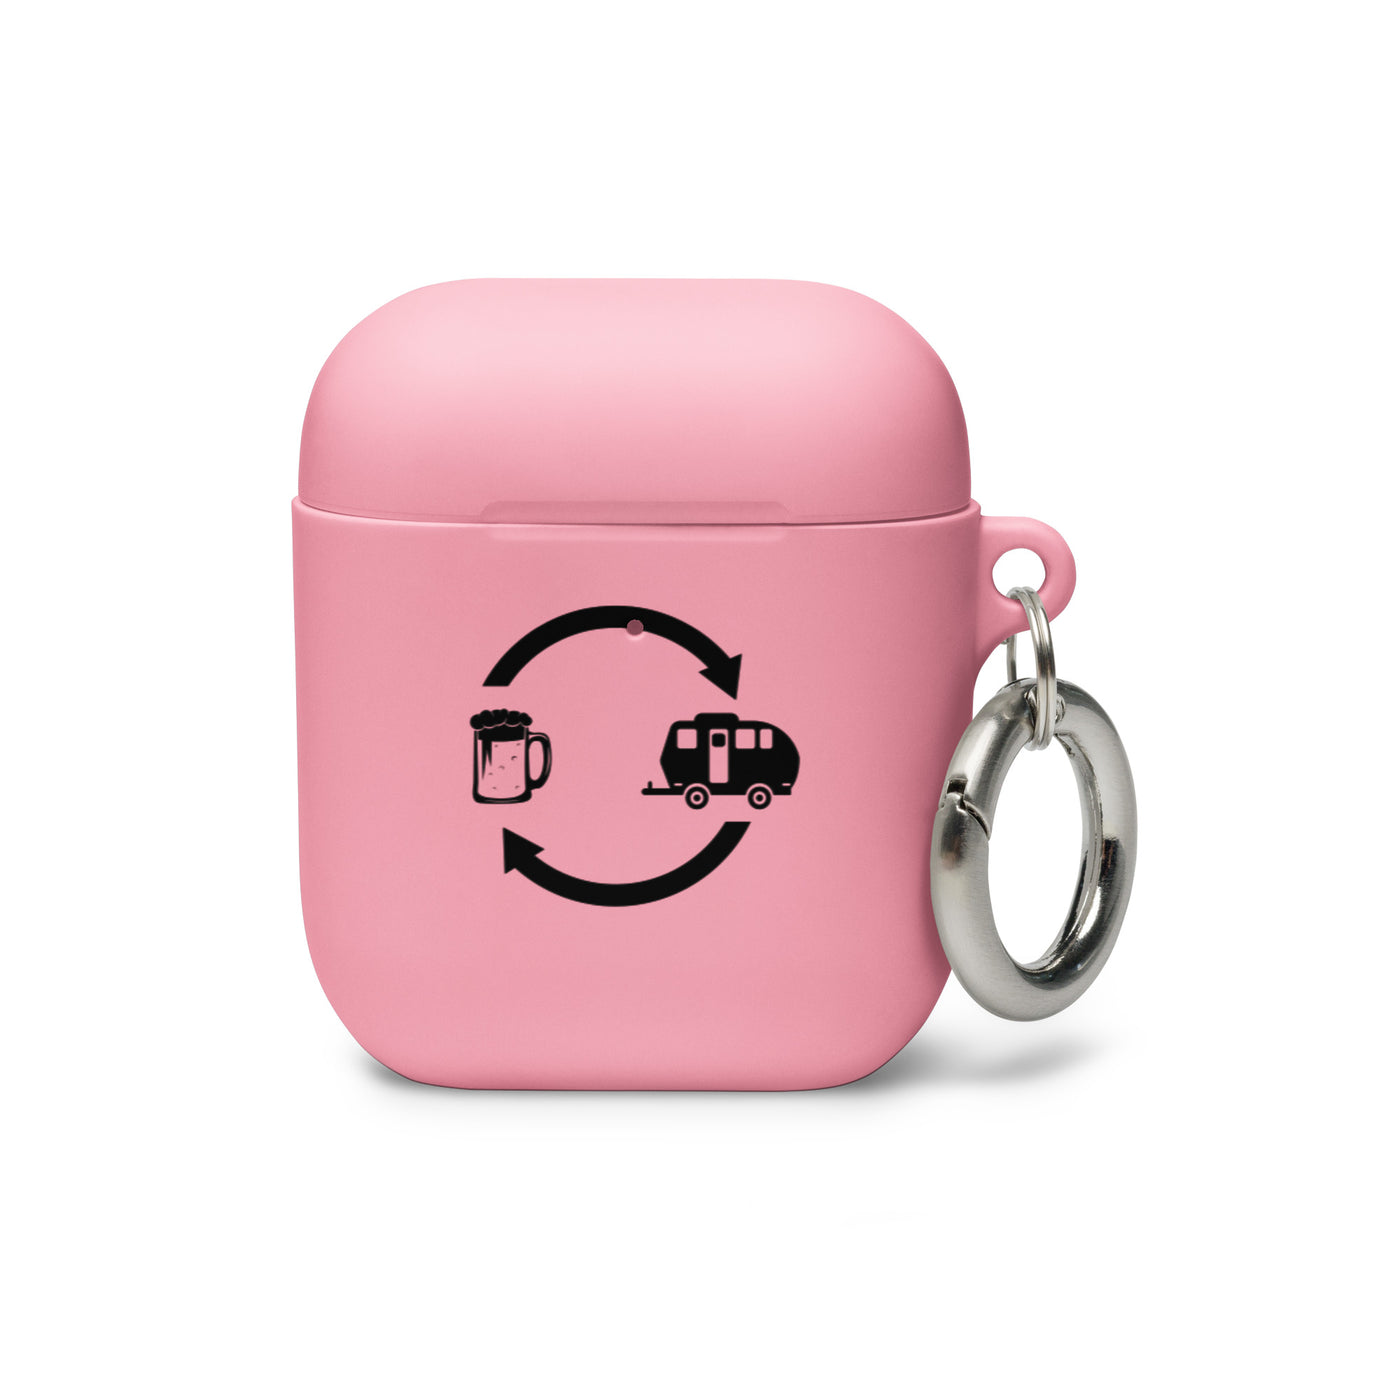 Bier, Pfeile Laden Und Camping 2 - AirPods Case camping Pink AirPods